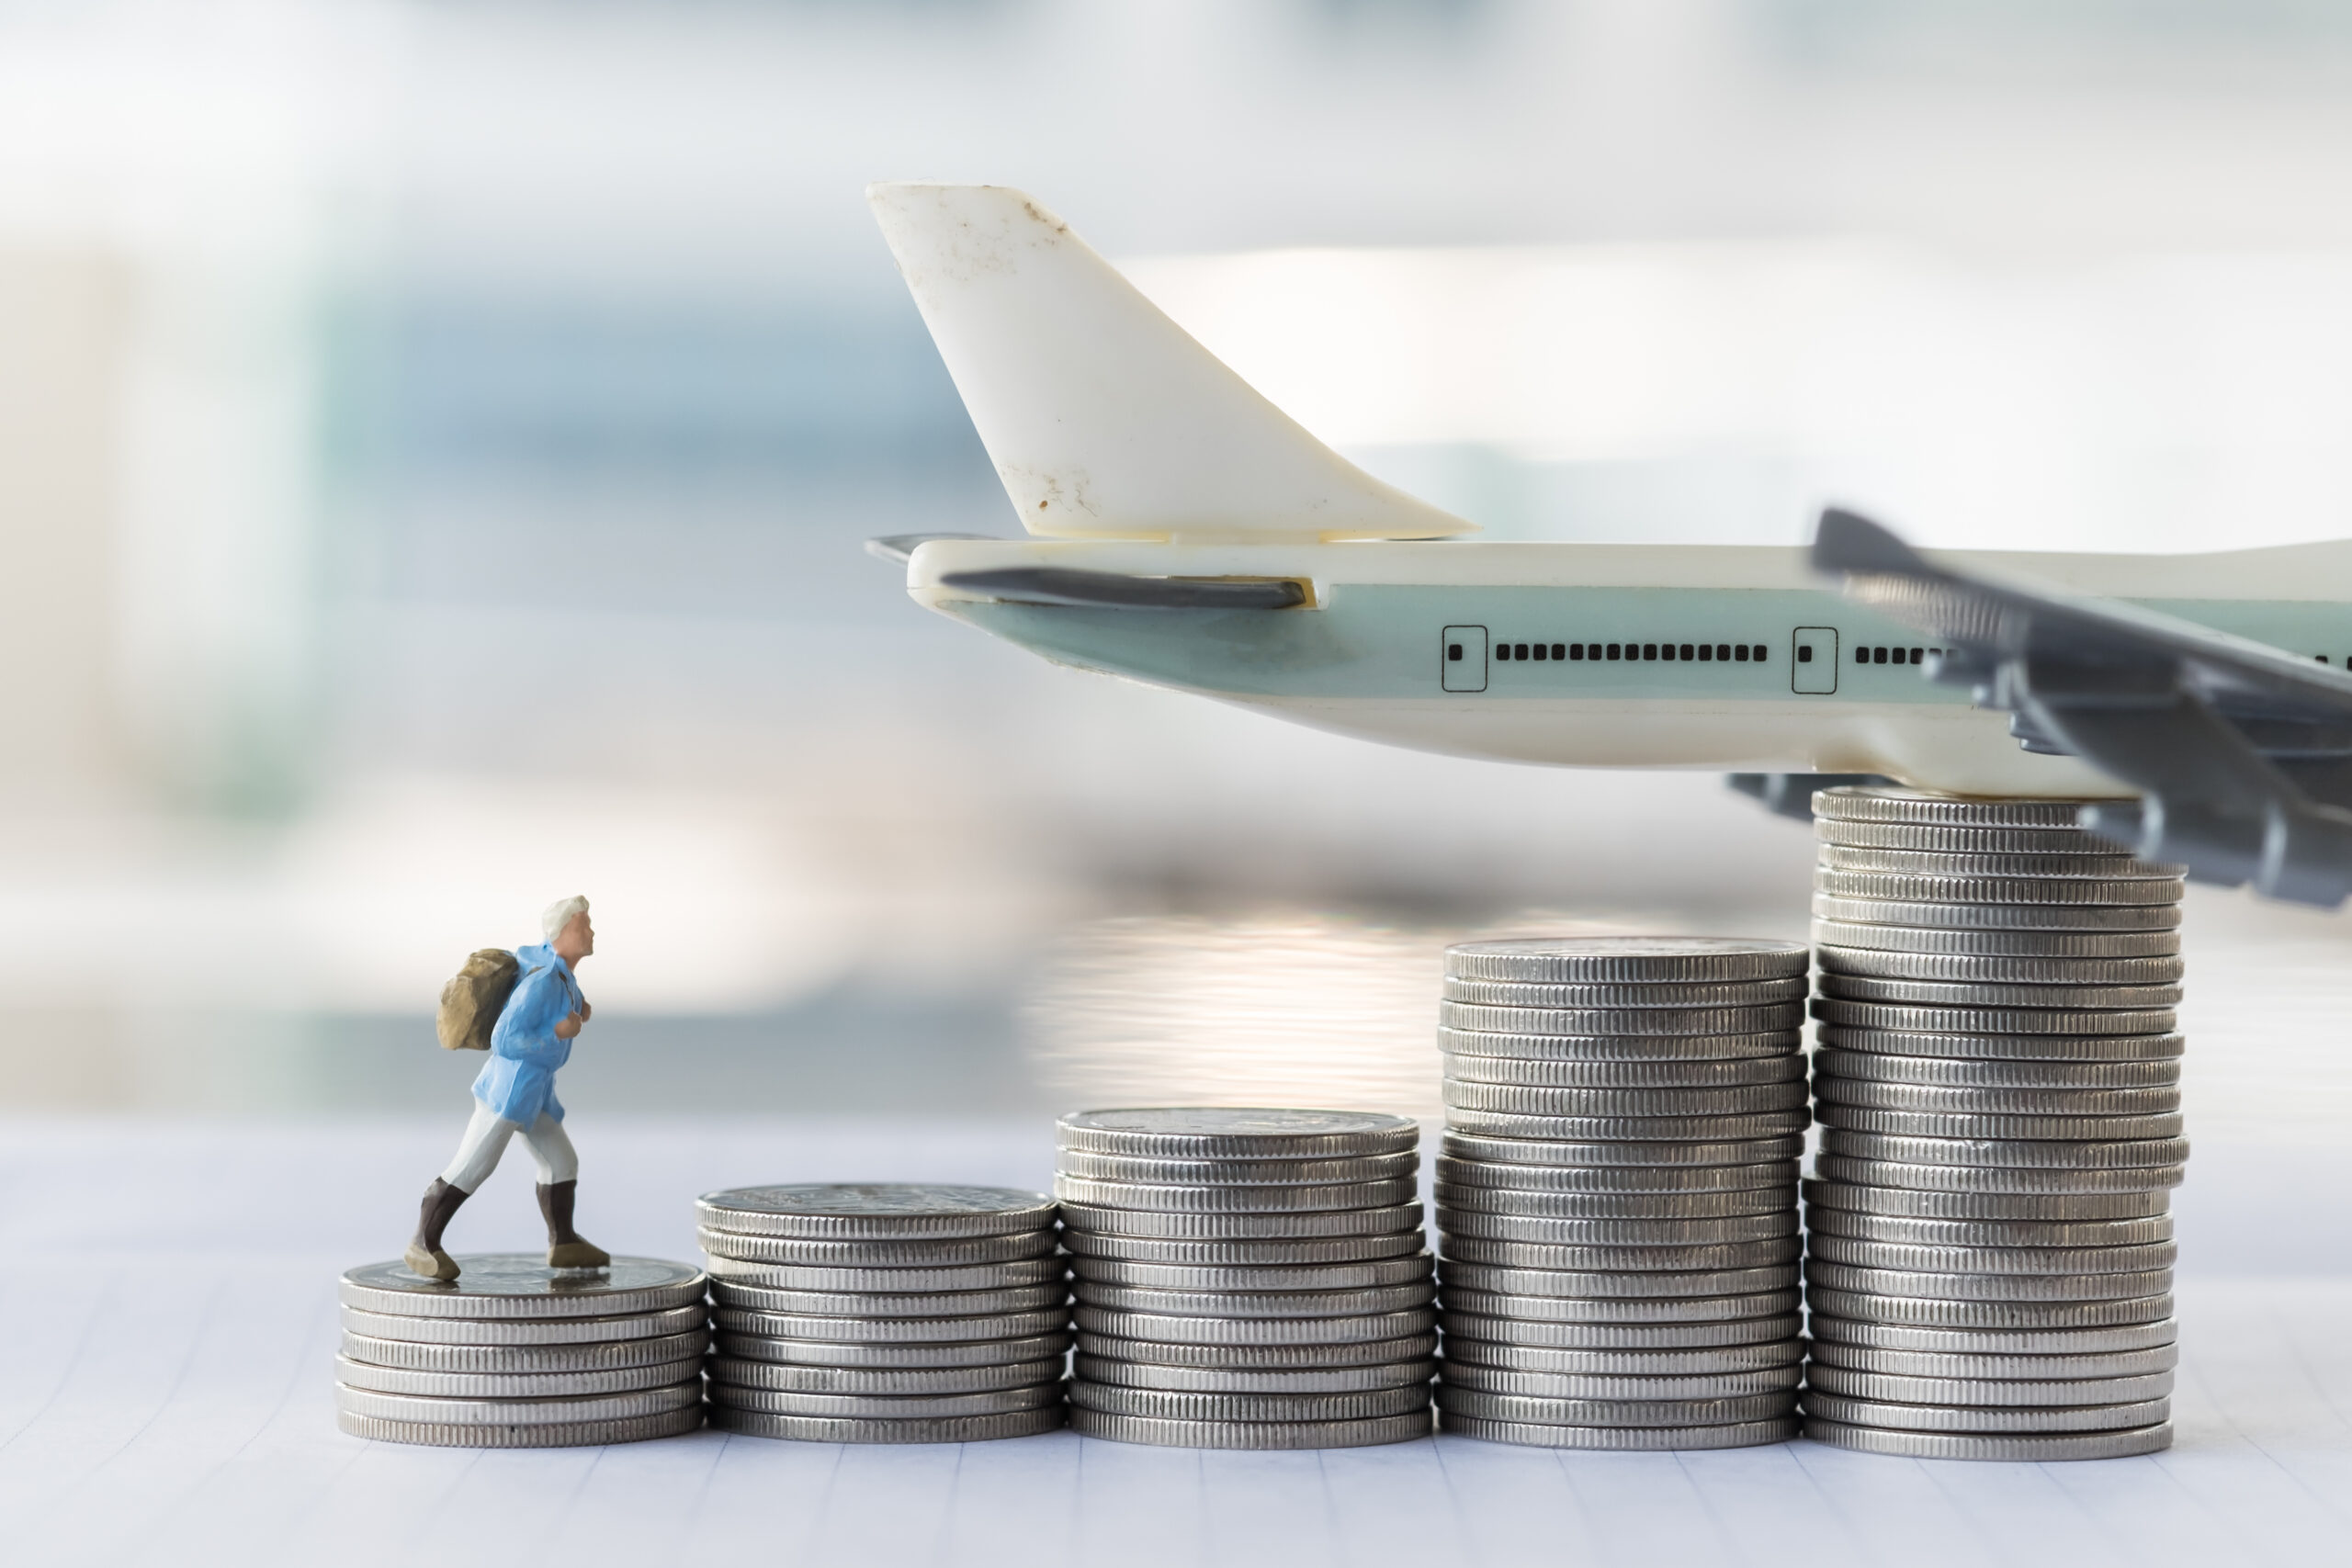 Financing the Pro Pilot Dream…Without Getting Scammed